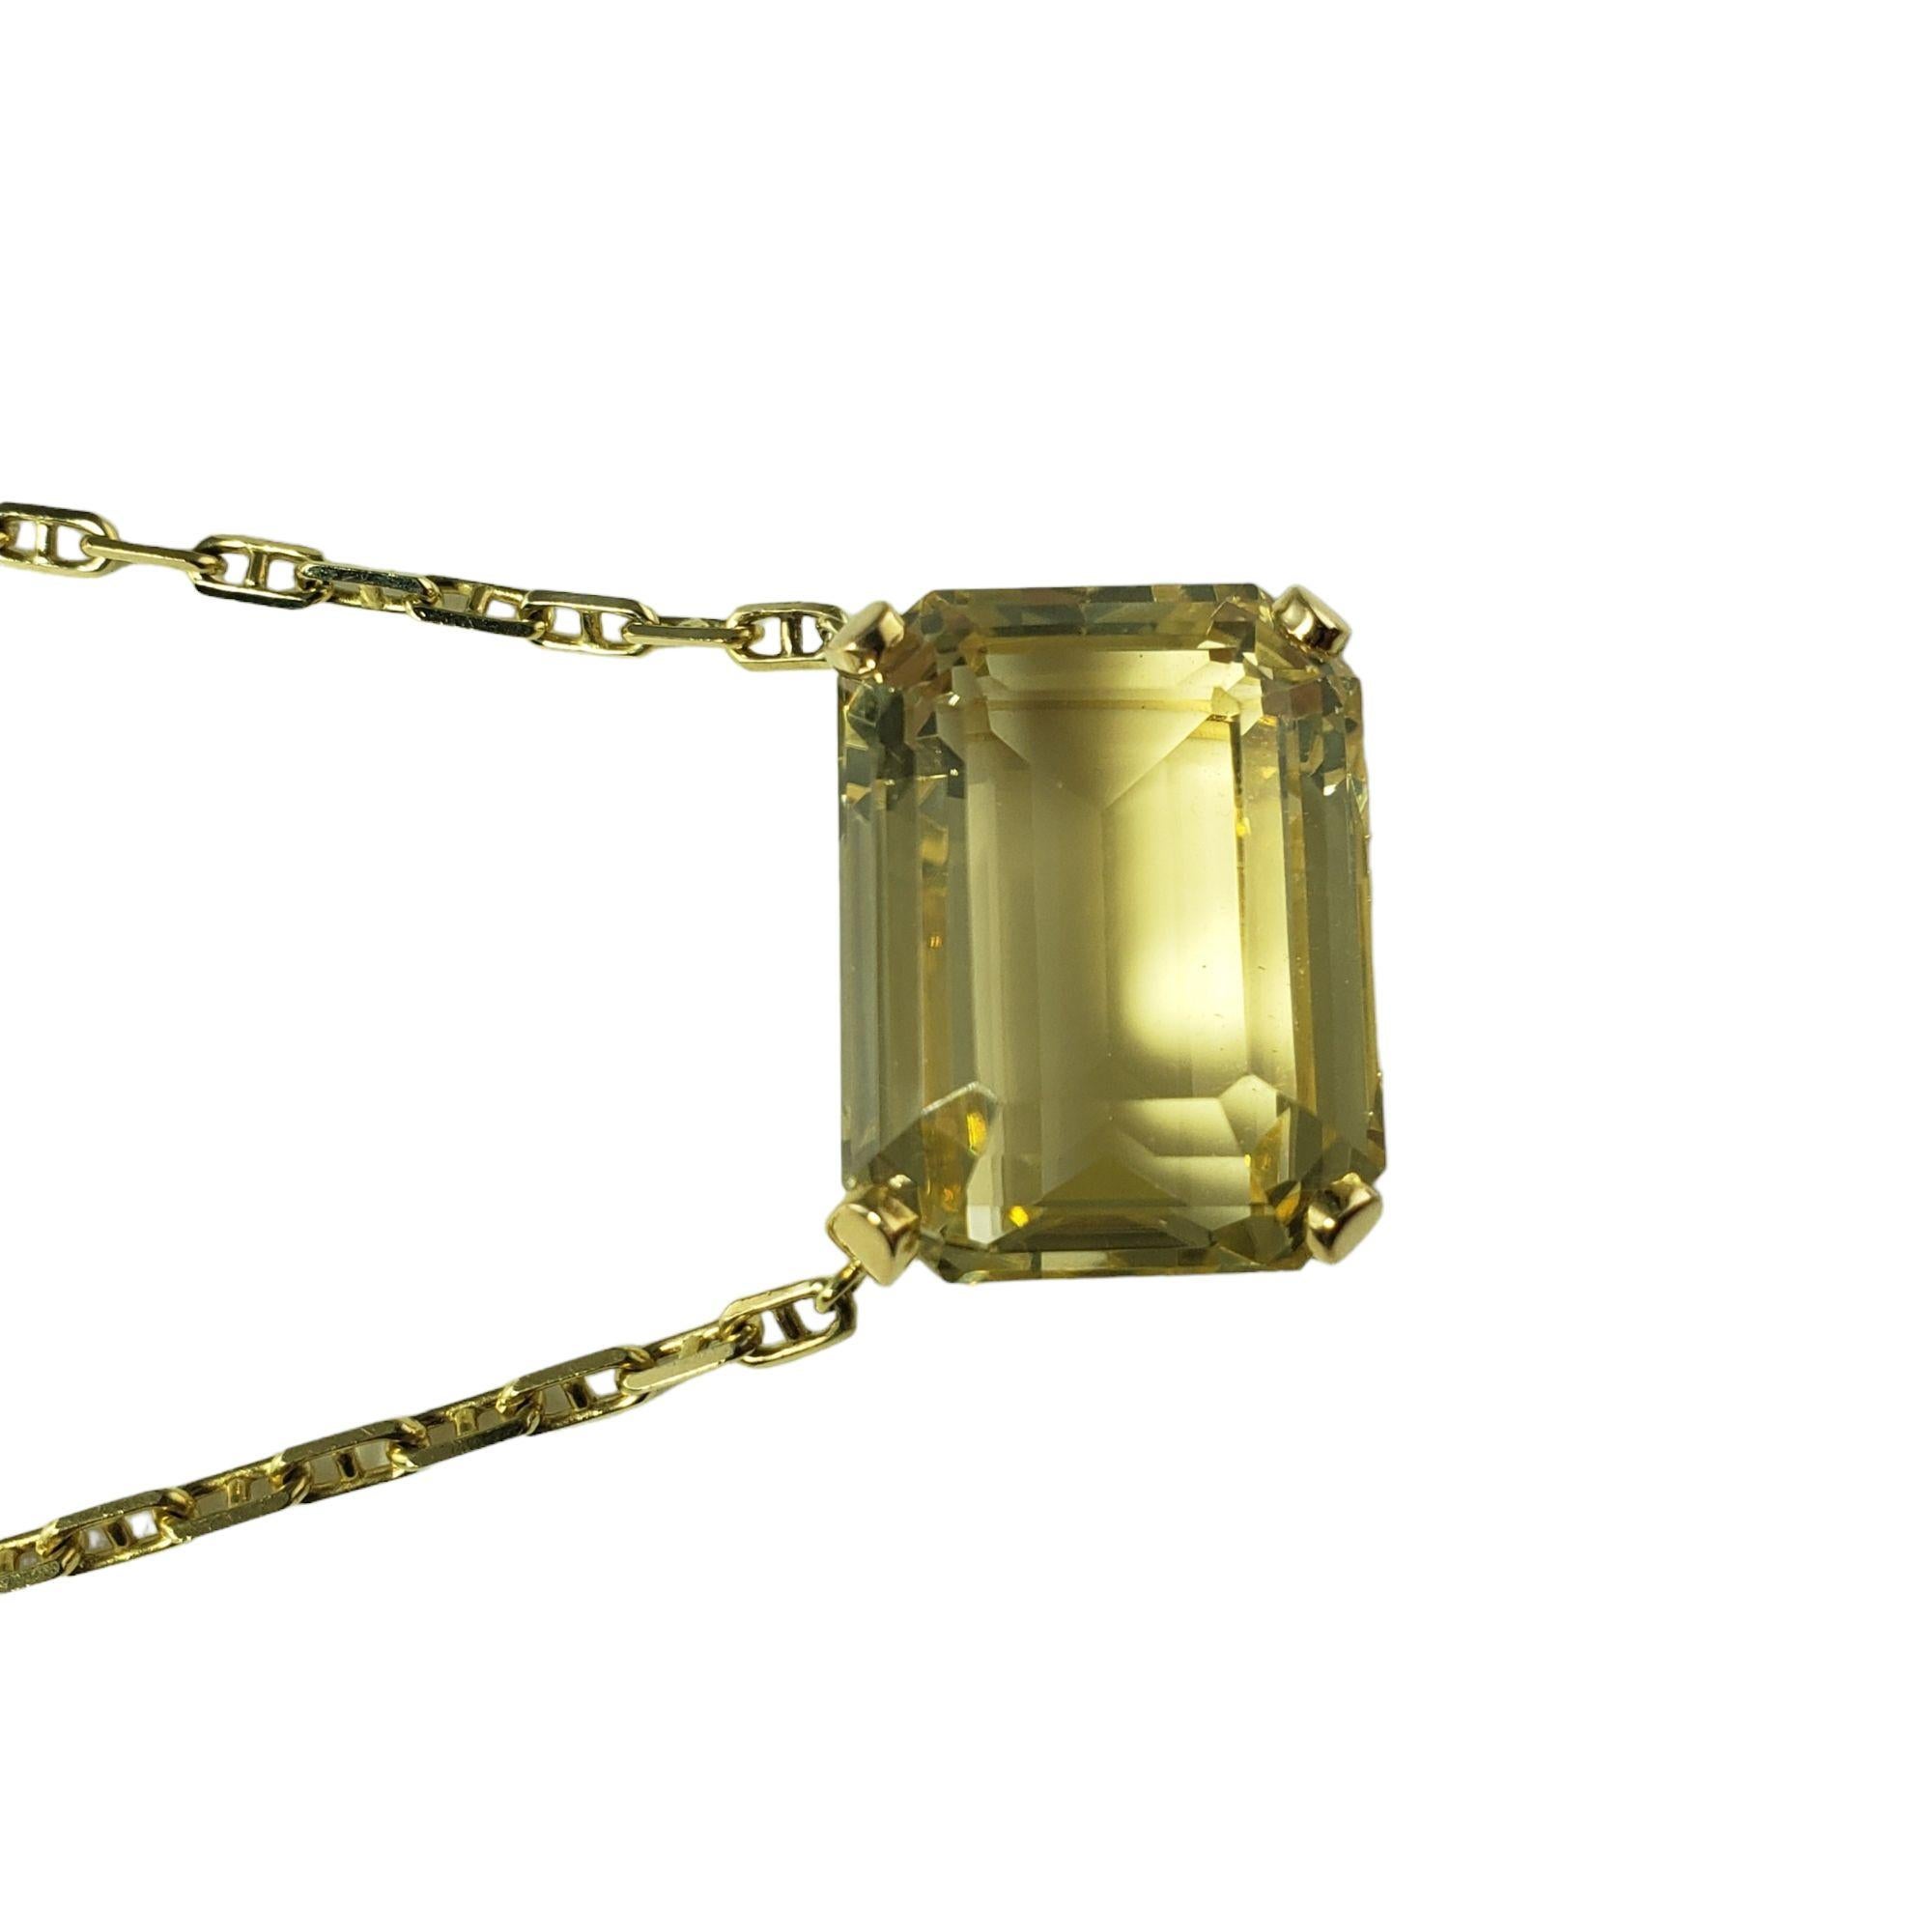 Vintage 14 Karat Yellow Gold Citrine Pendant Necklace JAGi Certified-

This elegant pendant necklace features one emerald cut citrine (24 mm x 18 mm) set in classic 14K yellow gold.

Citrine weight: 37.3 ct.

Size: 27 inches

Weight: 24.5 gr./ 15.8